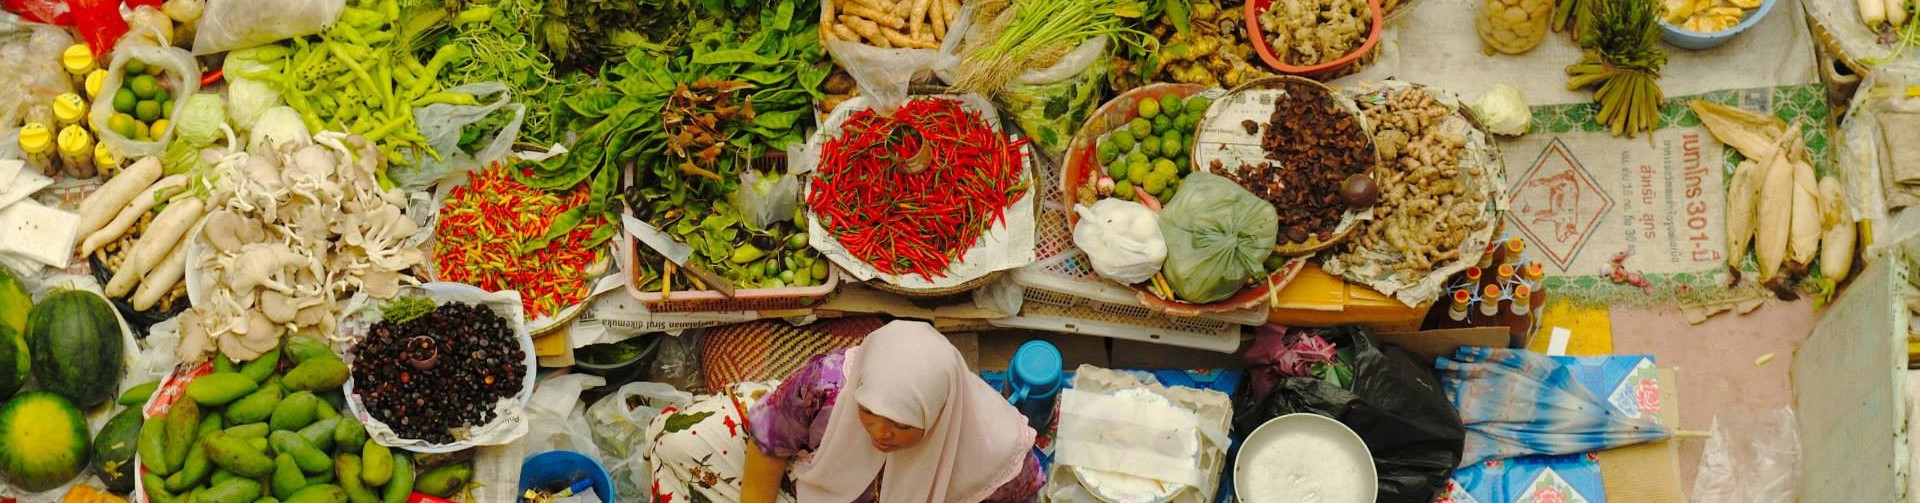 Patterns of regional agri-food trade in Asia